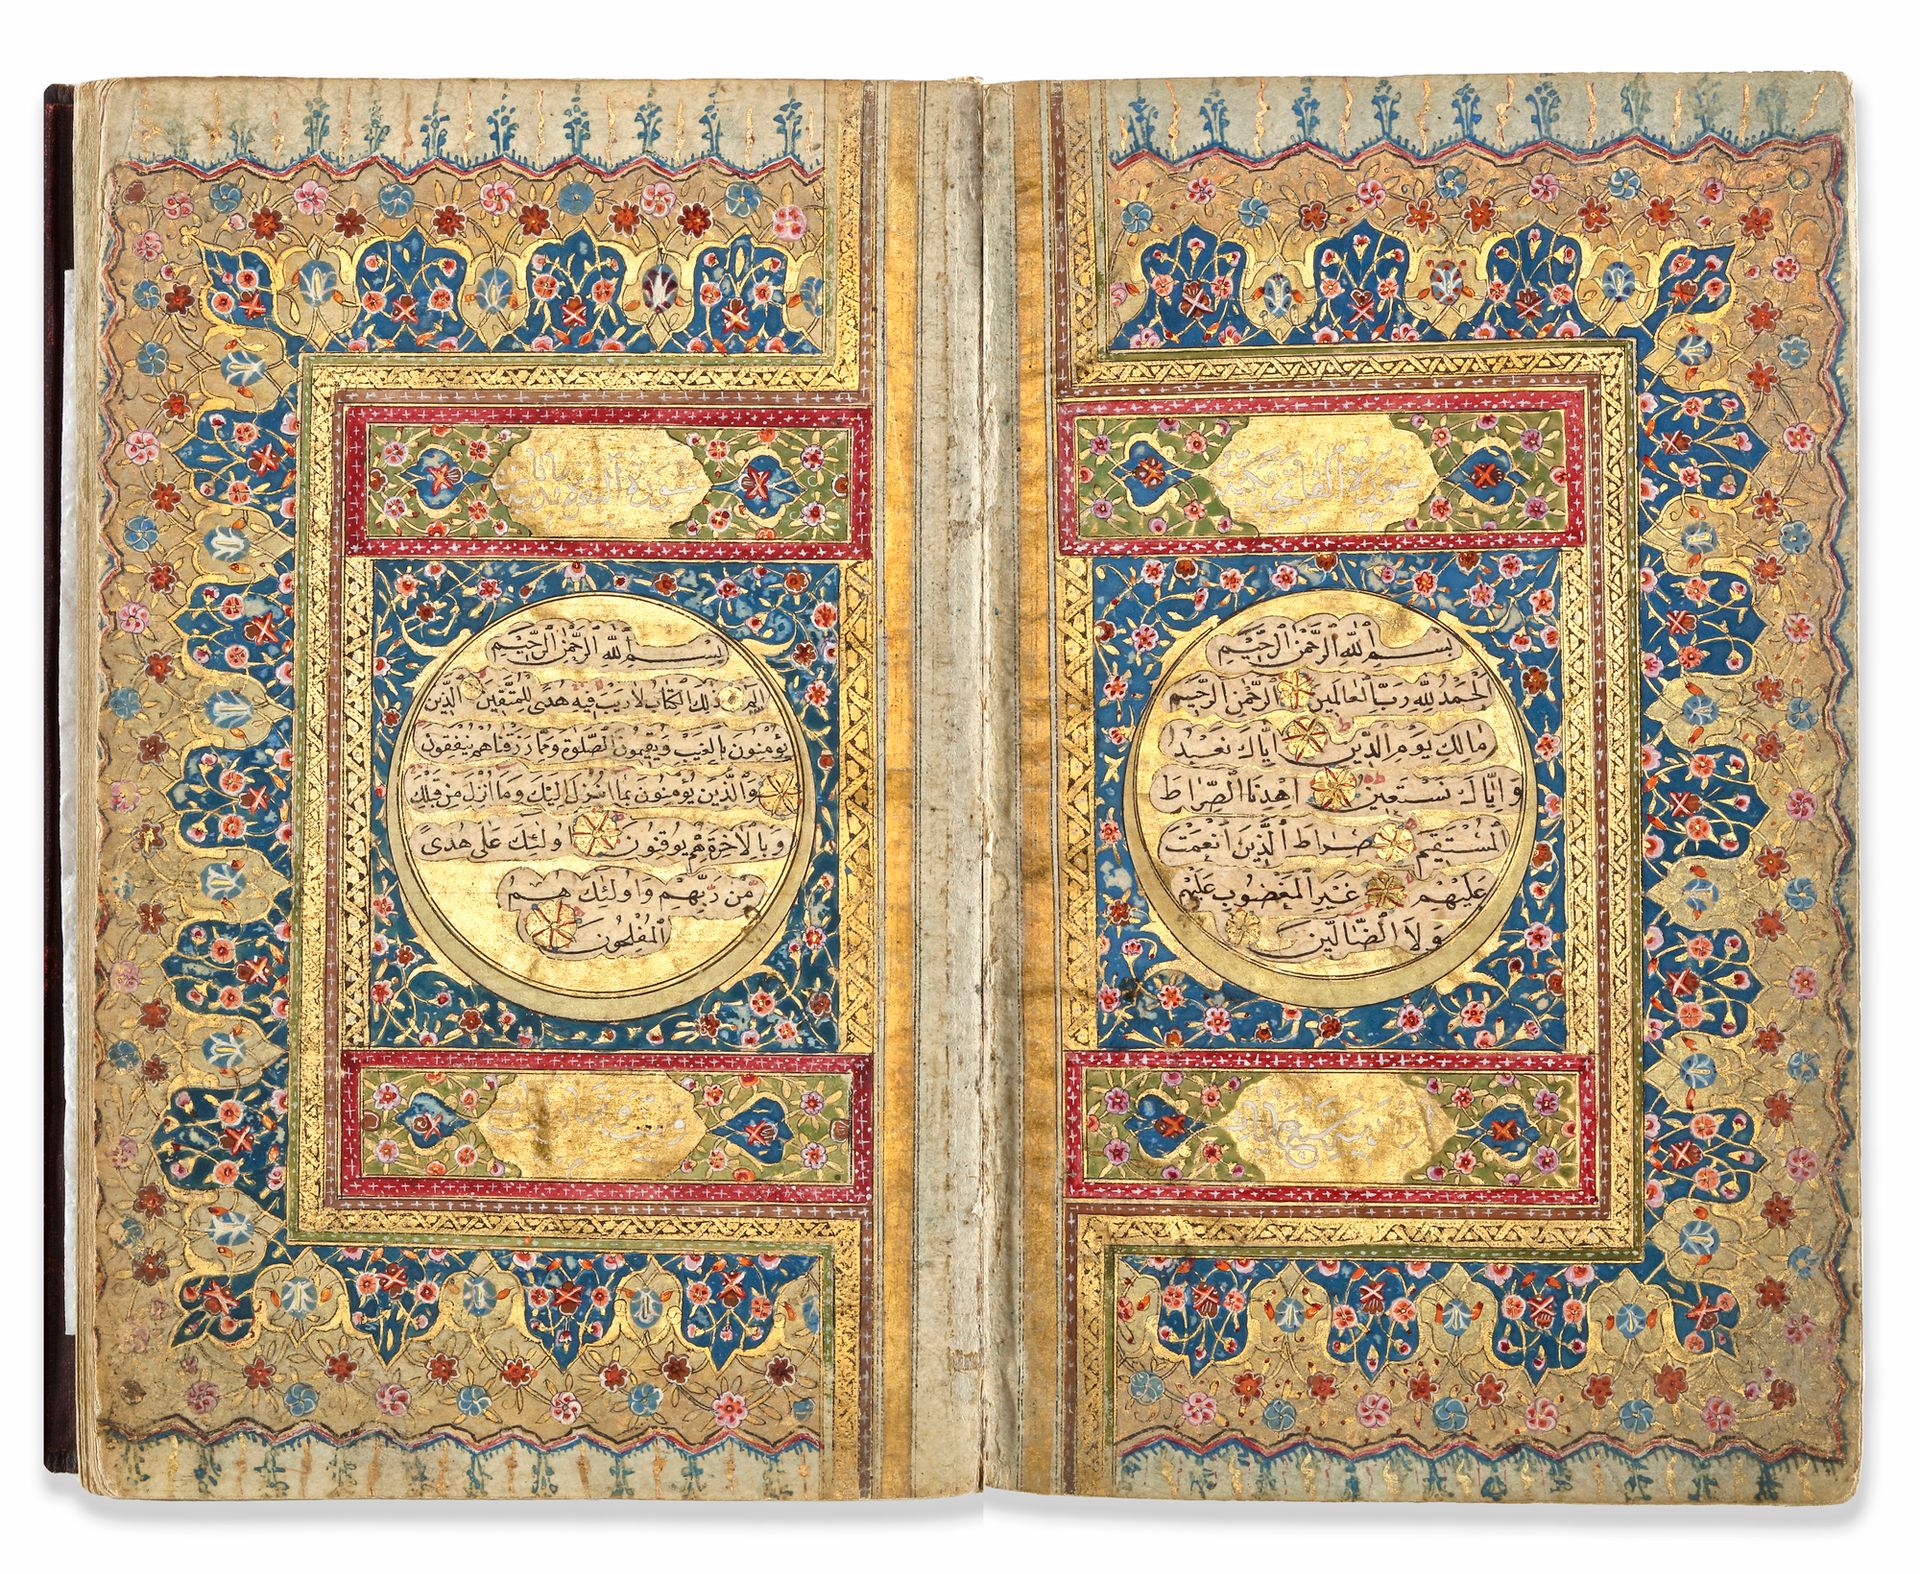 AN OTTOMAN QURAN SIGNED BY SULEIMAN AL-QAE'I AND DATED 1191 AH/1777 AD 一部完整的《古兰经&hellip;